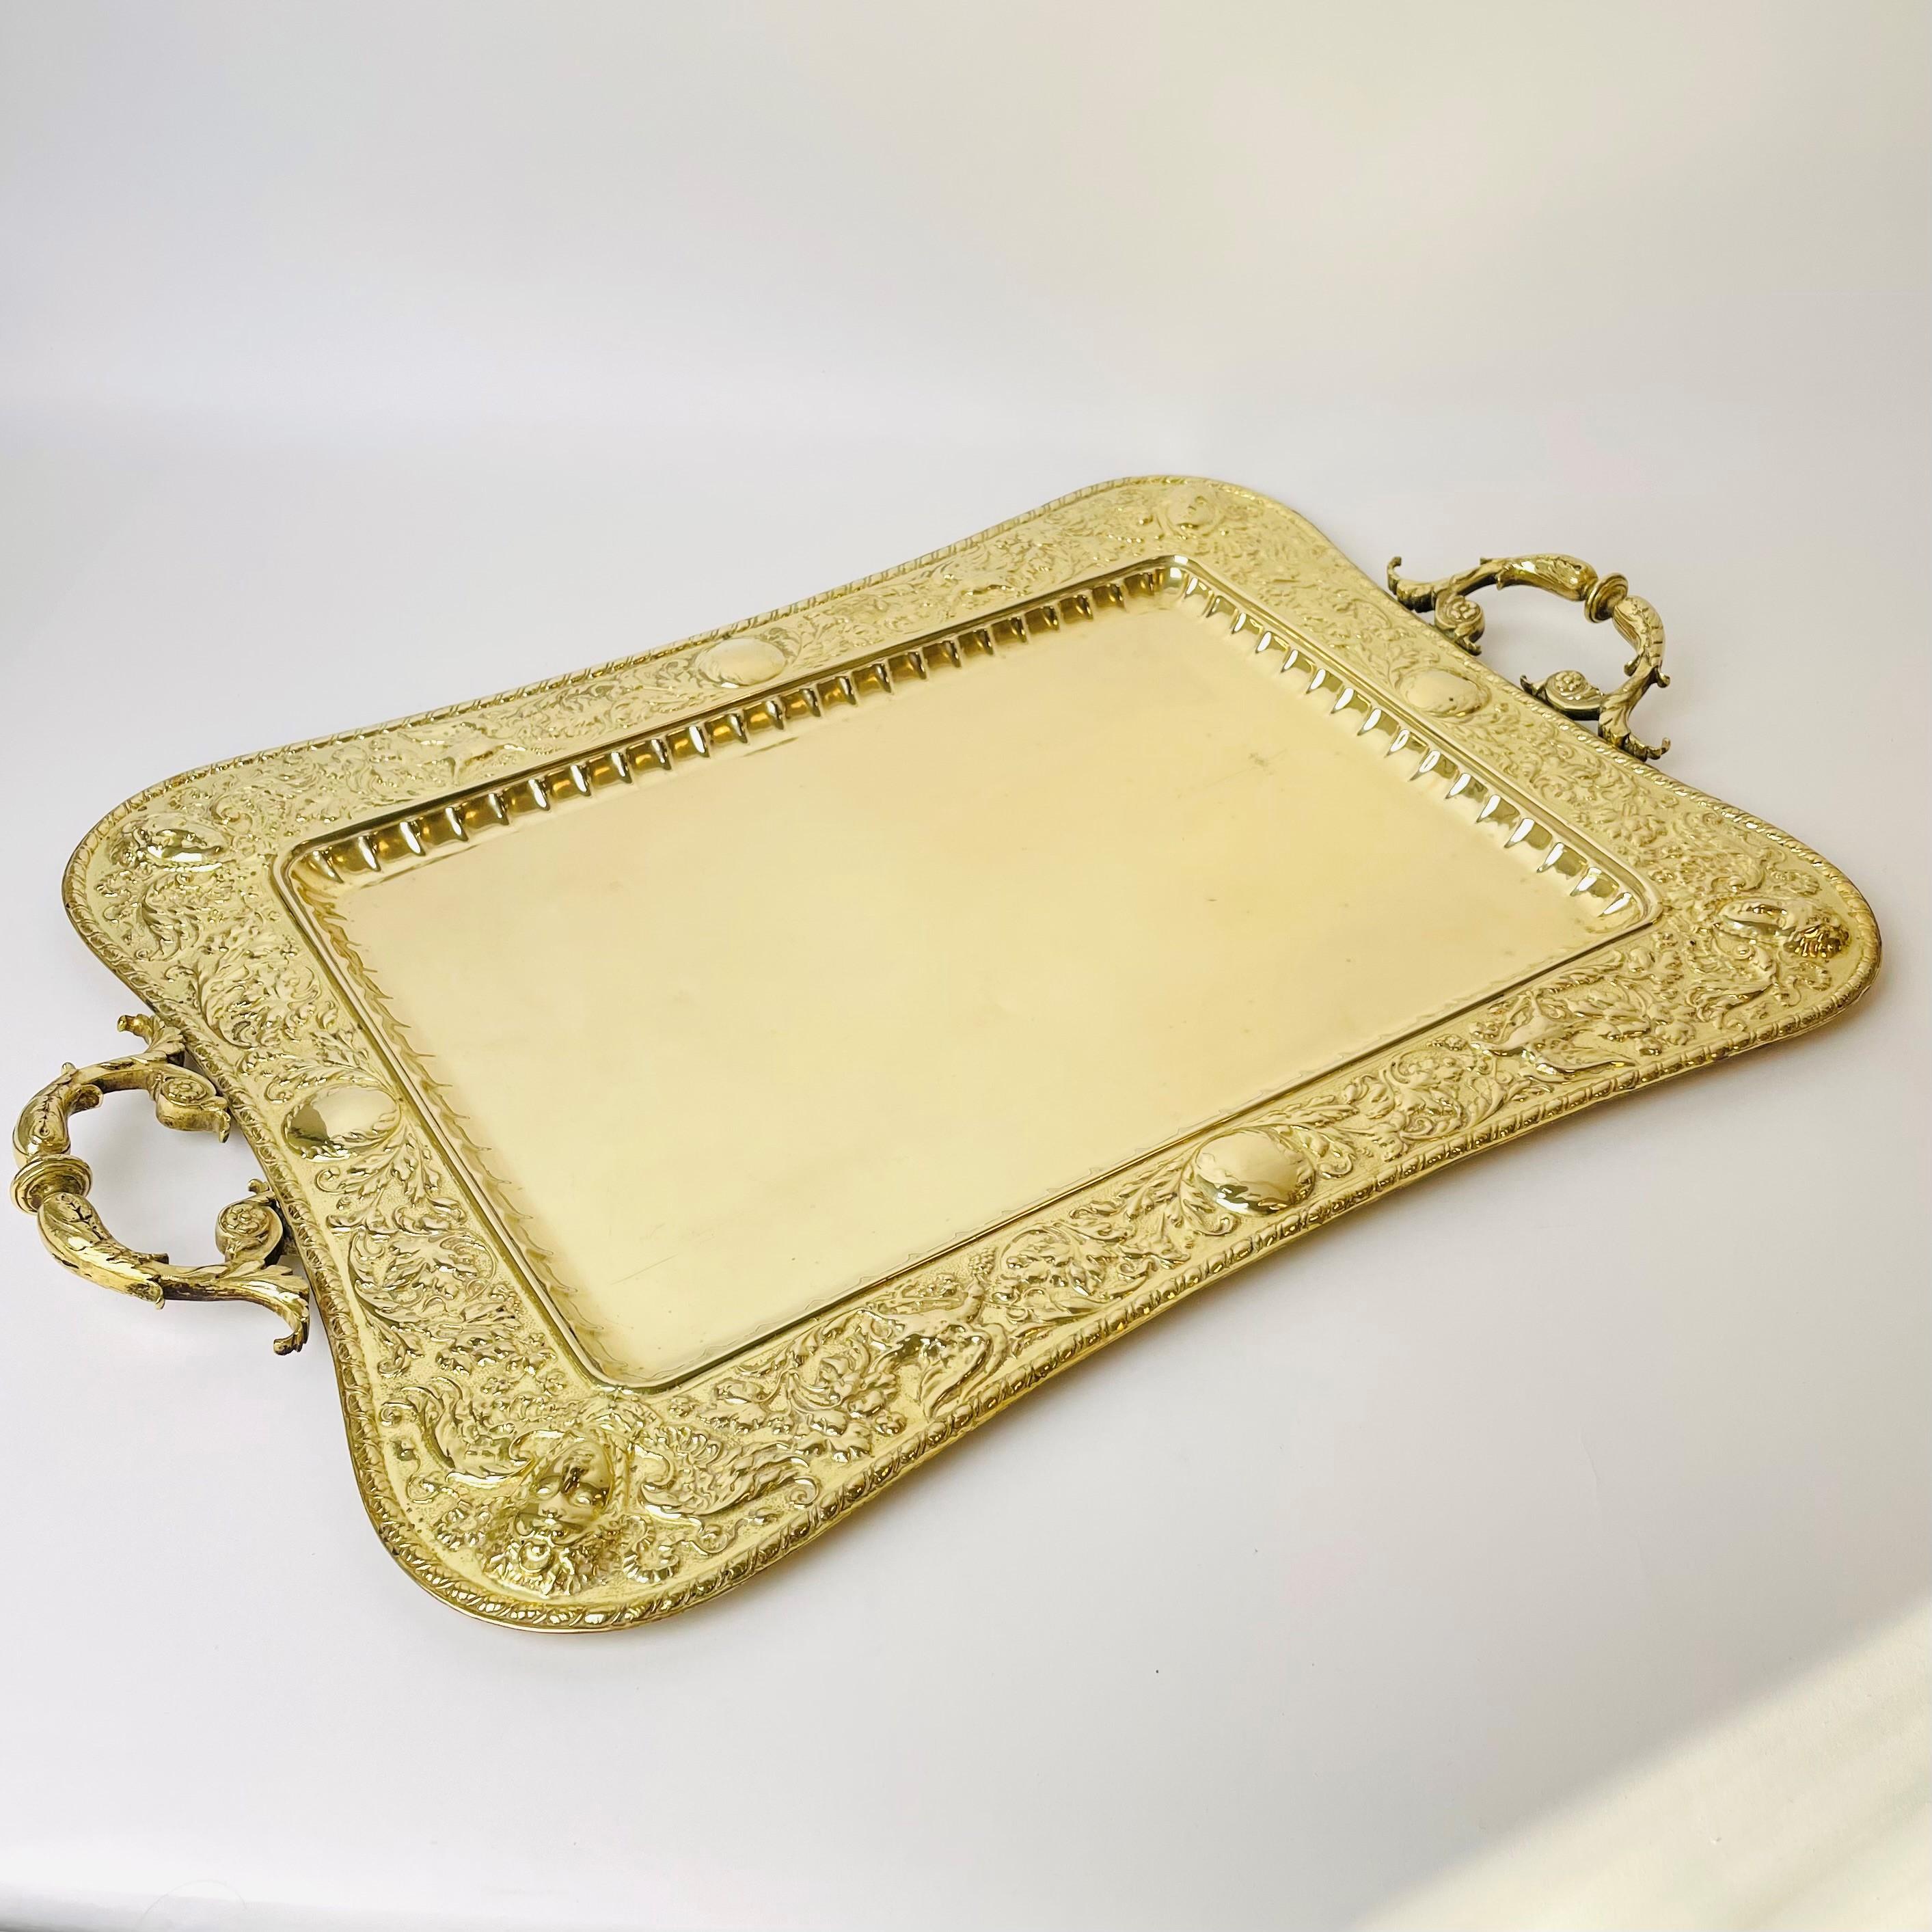 A large and magnificent brass Serving Tray. Heavy and of high quality. Made in the late 19th Century. 

The tray has minor bumps and scratches (see pictures), but for its age in very good condition.


Wear consistent with age and use.